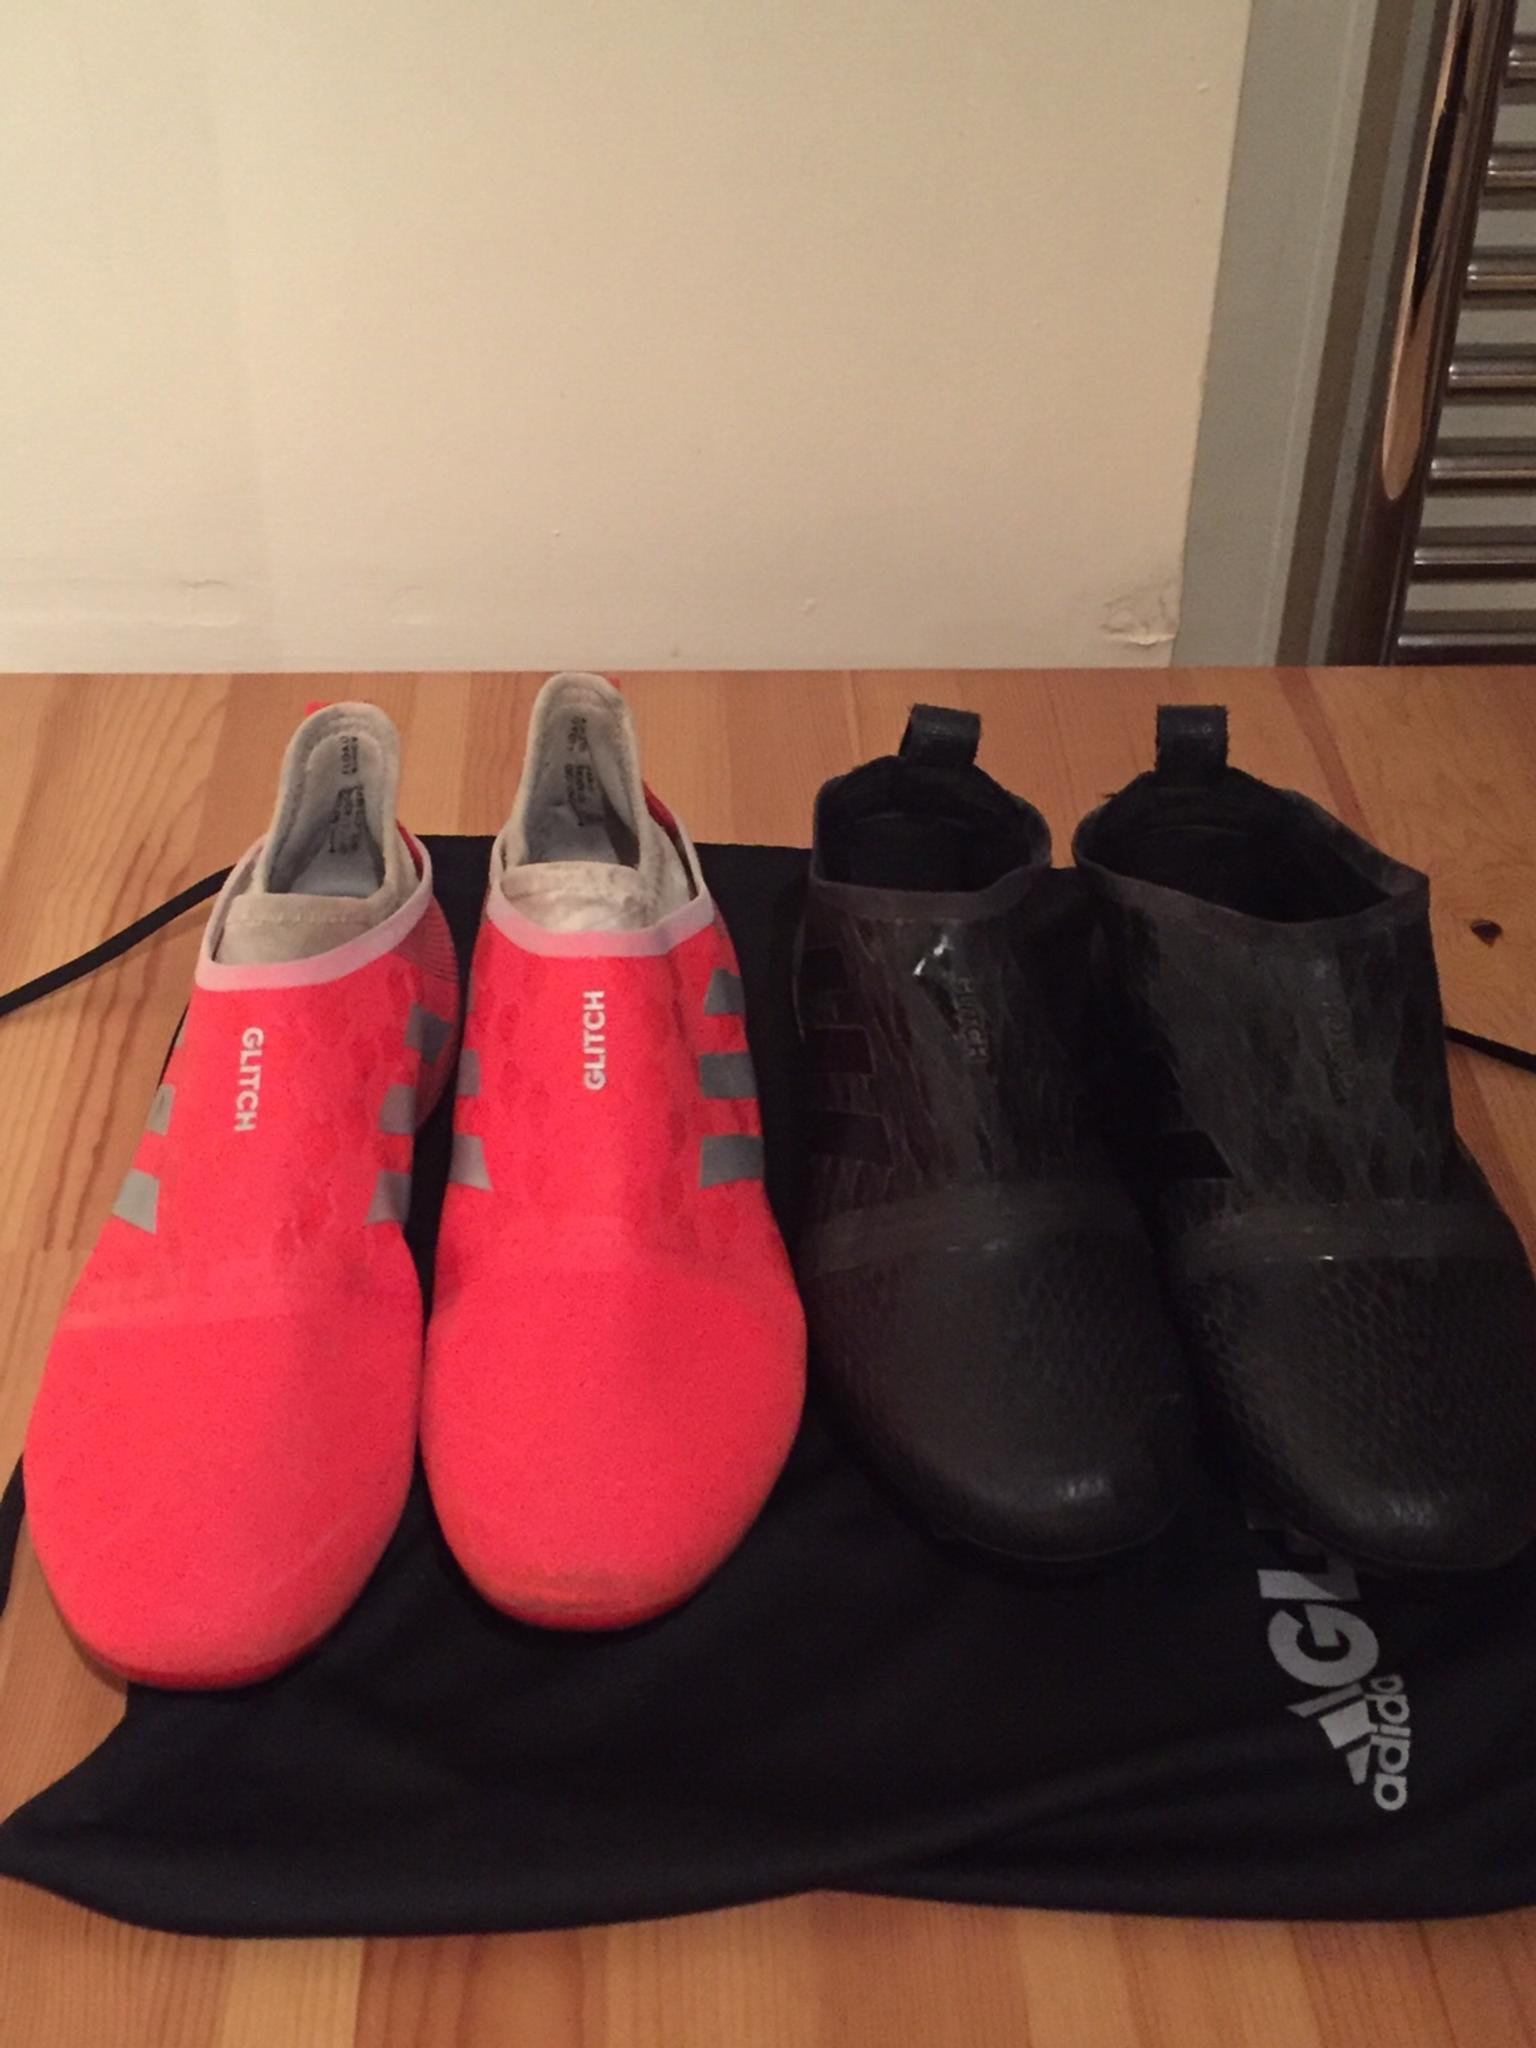 adidas GLITCH Football Boots - Size 8 in LU4 Chalton for £70.00 for sale |  Shpock